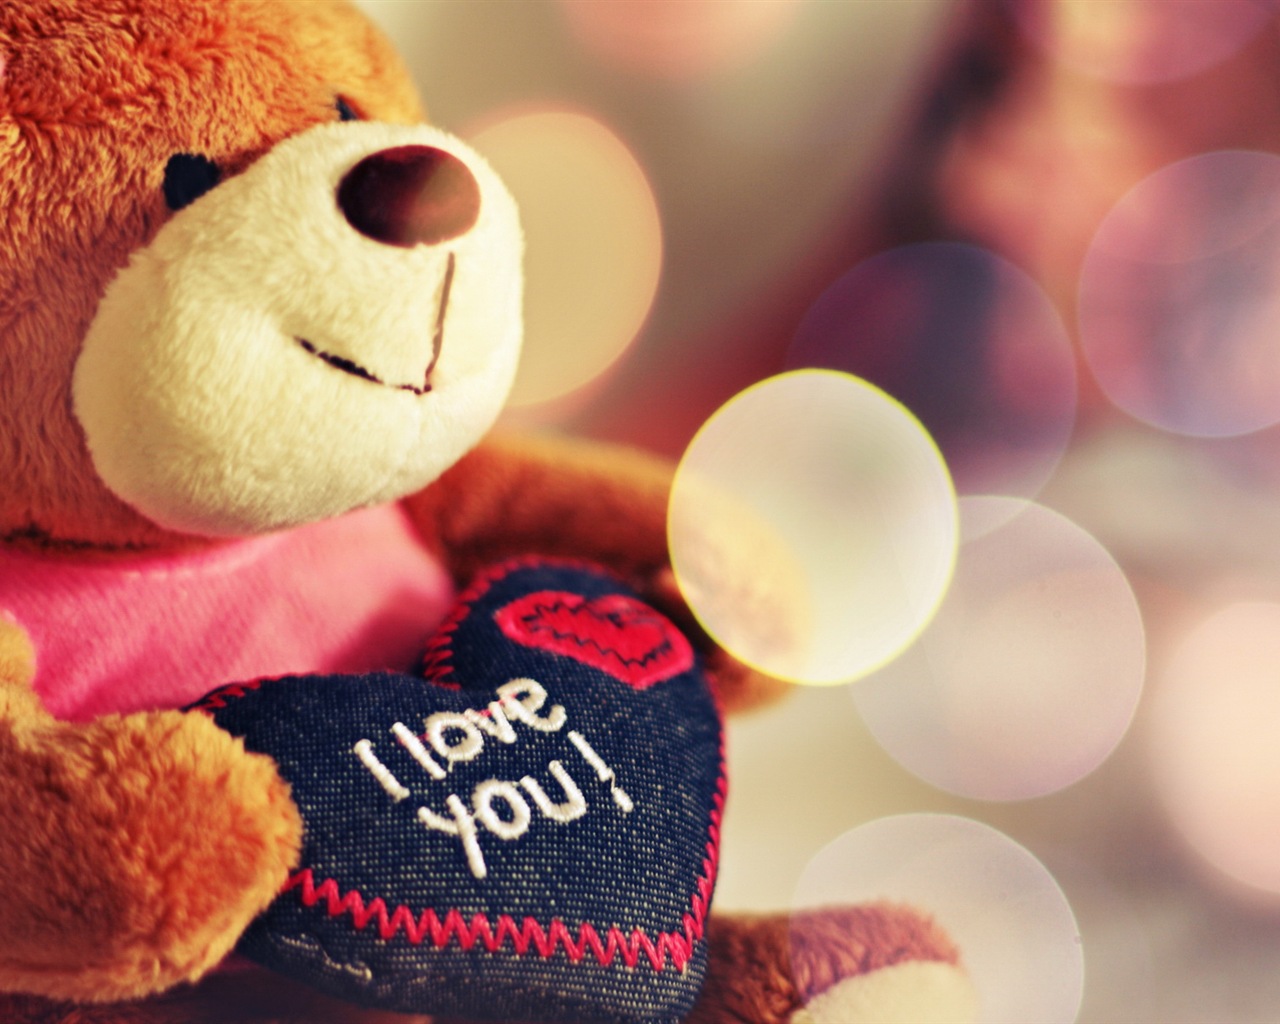 Warm and romantic Valentine's Day HD wallpapers #14 - 1280x1024